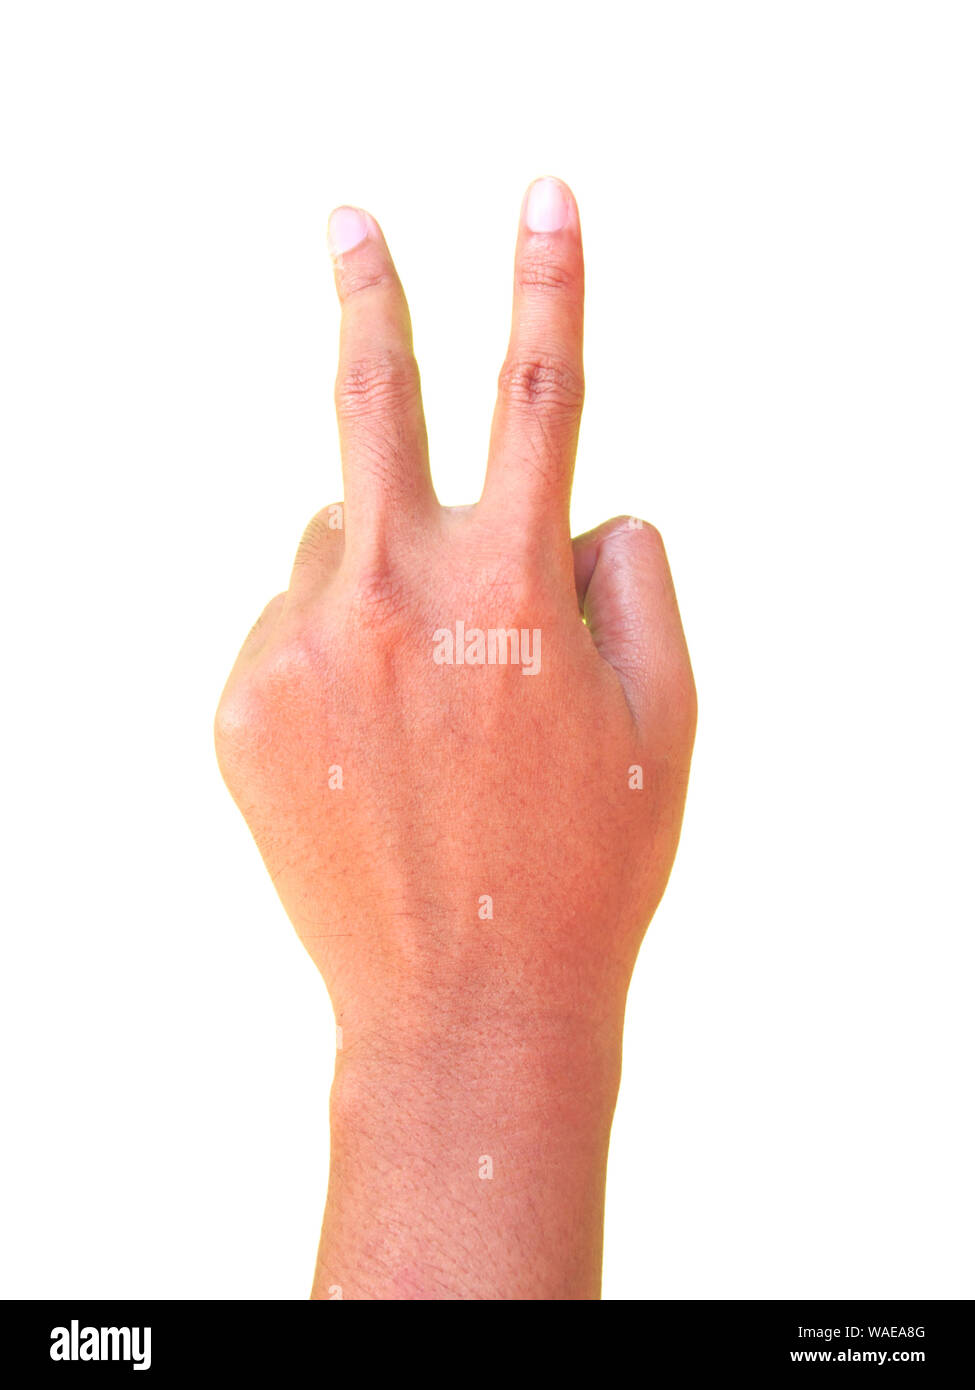 Peace, number two hand gesture symbol Stock Photo